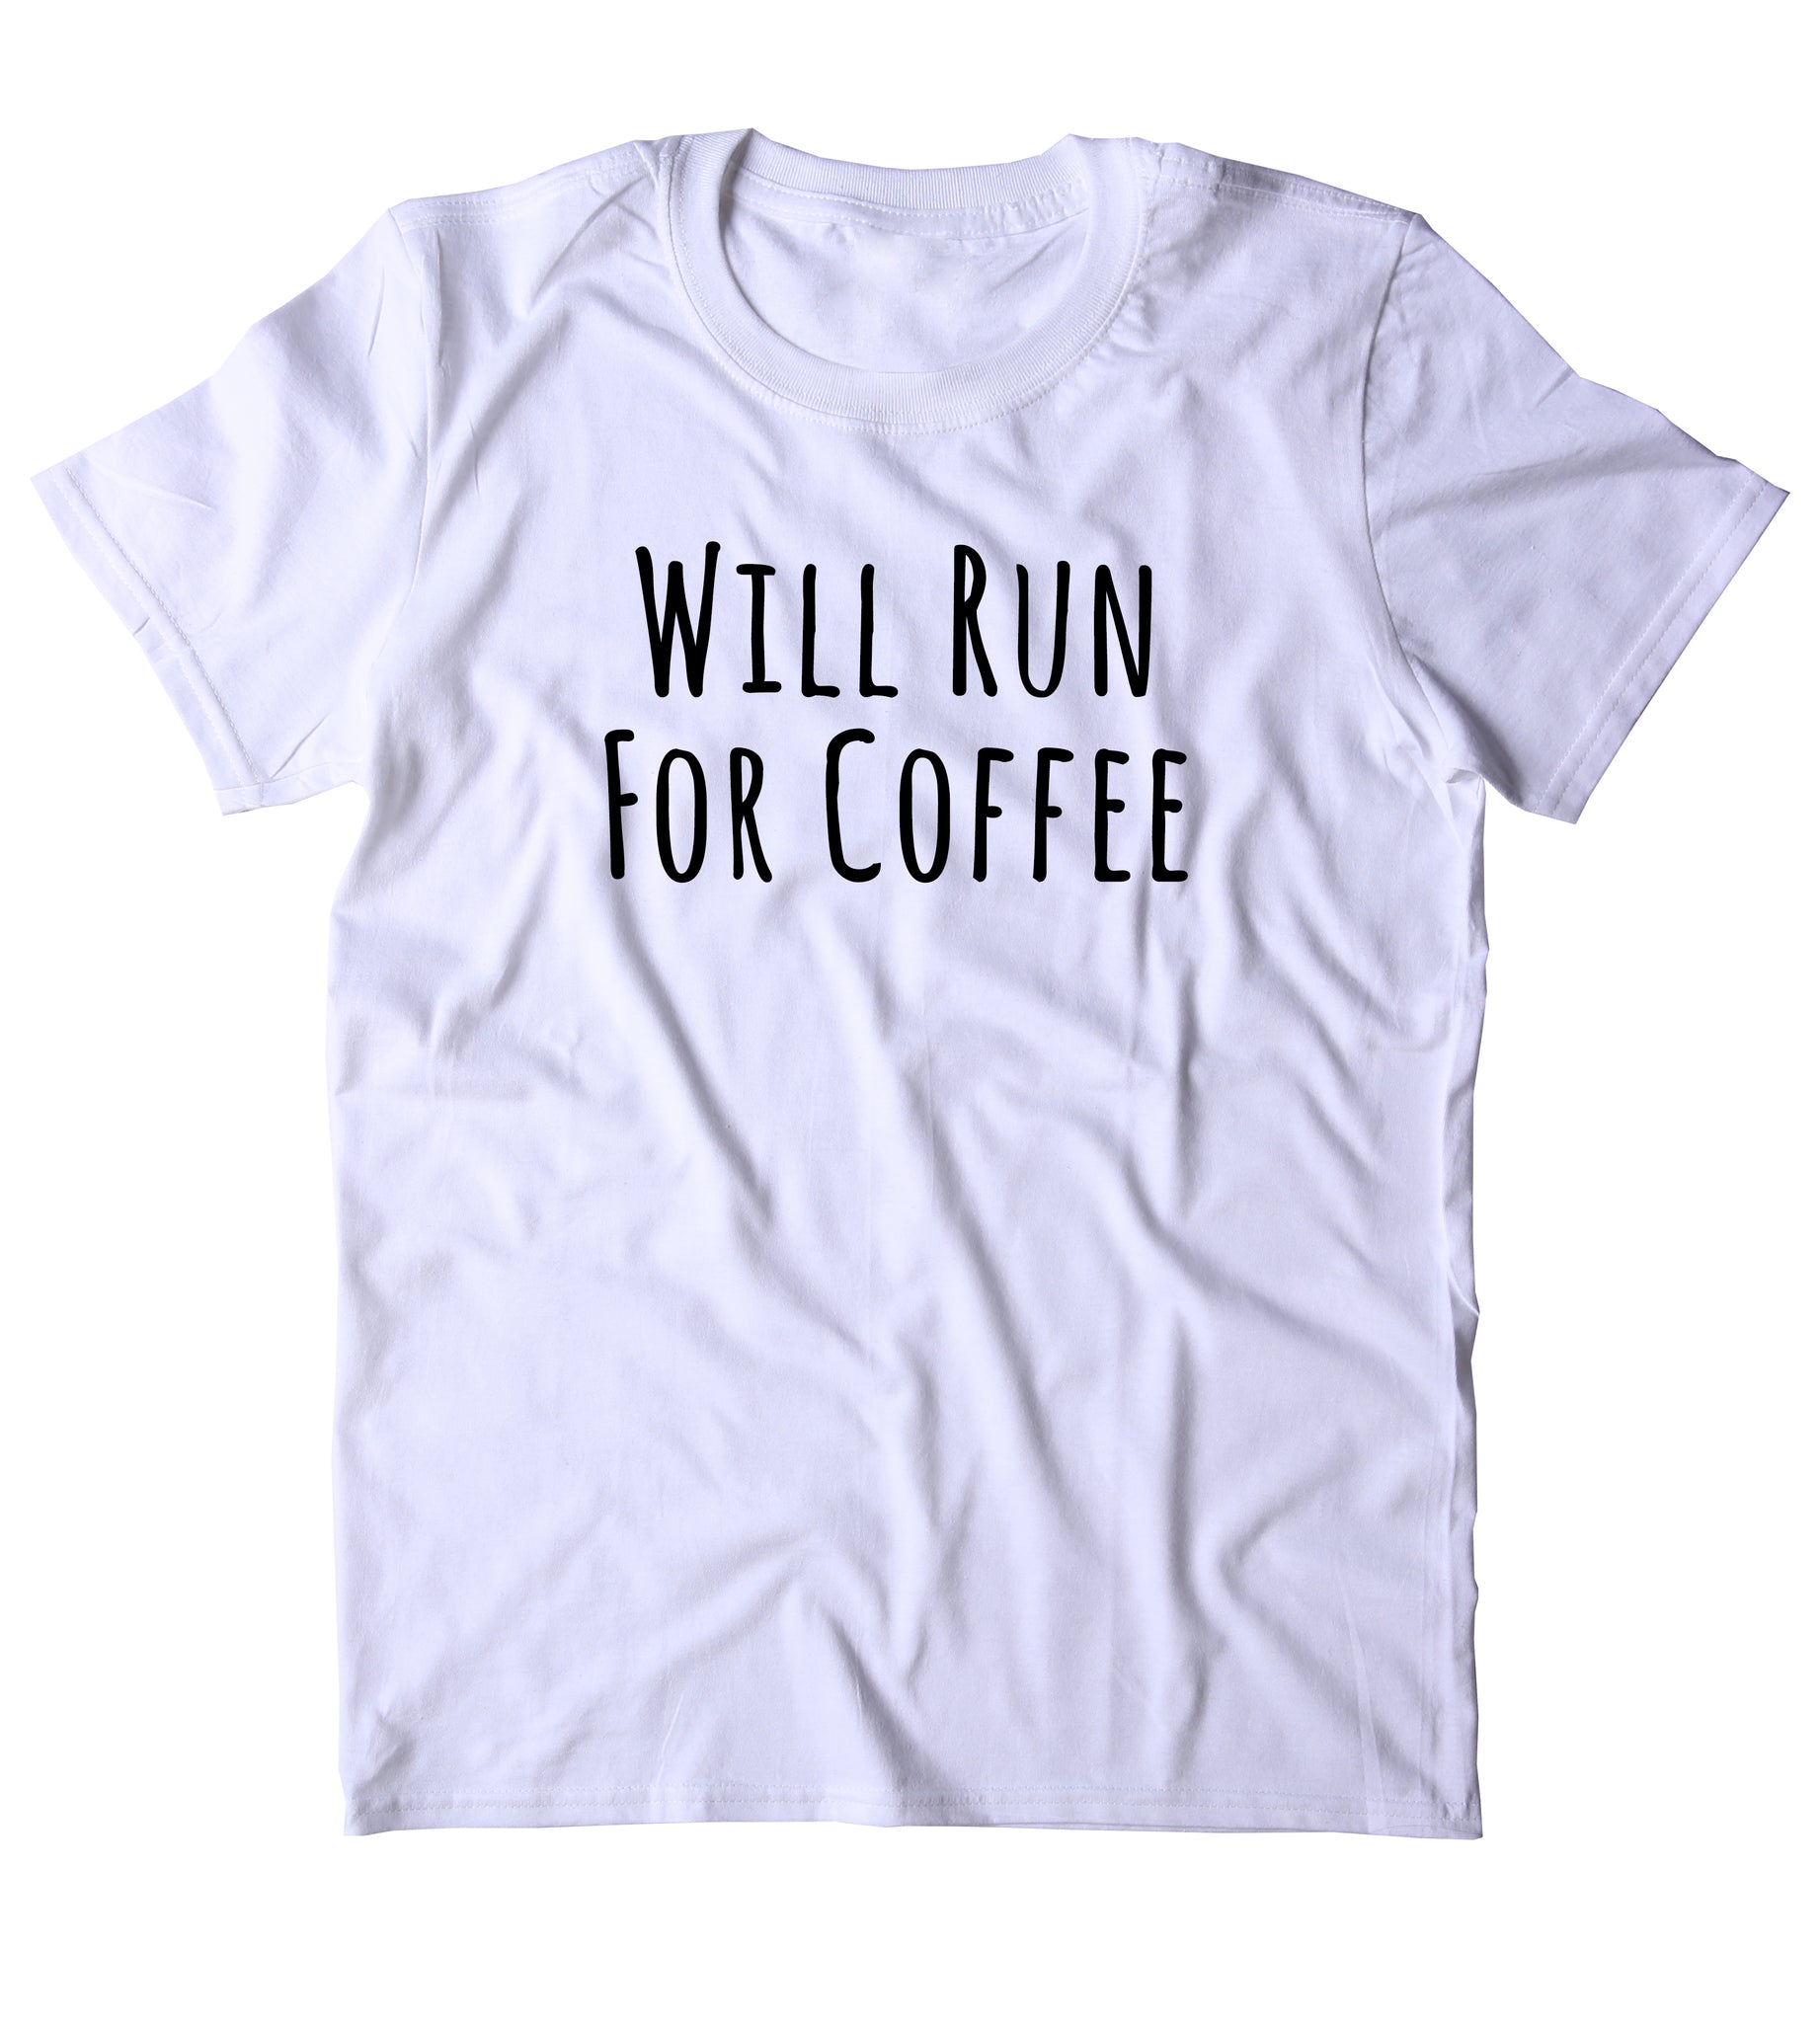 Will Run For Coffee Shirt Funny Work Out Running Caffeine Addict Gift ...